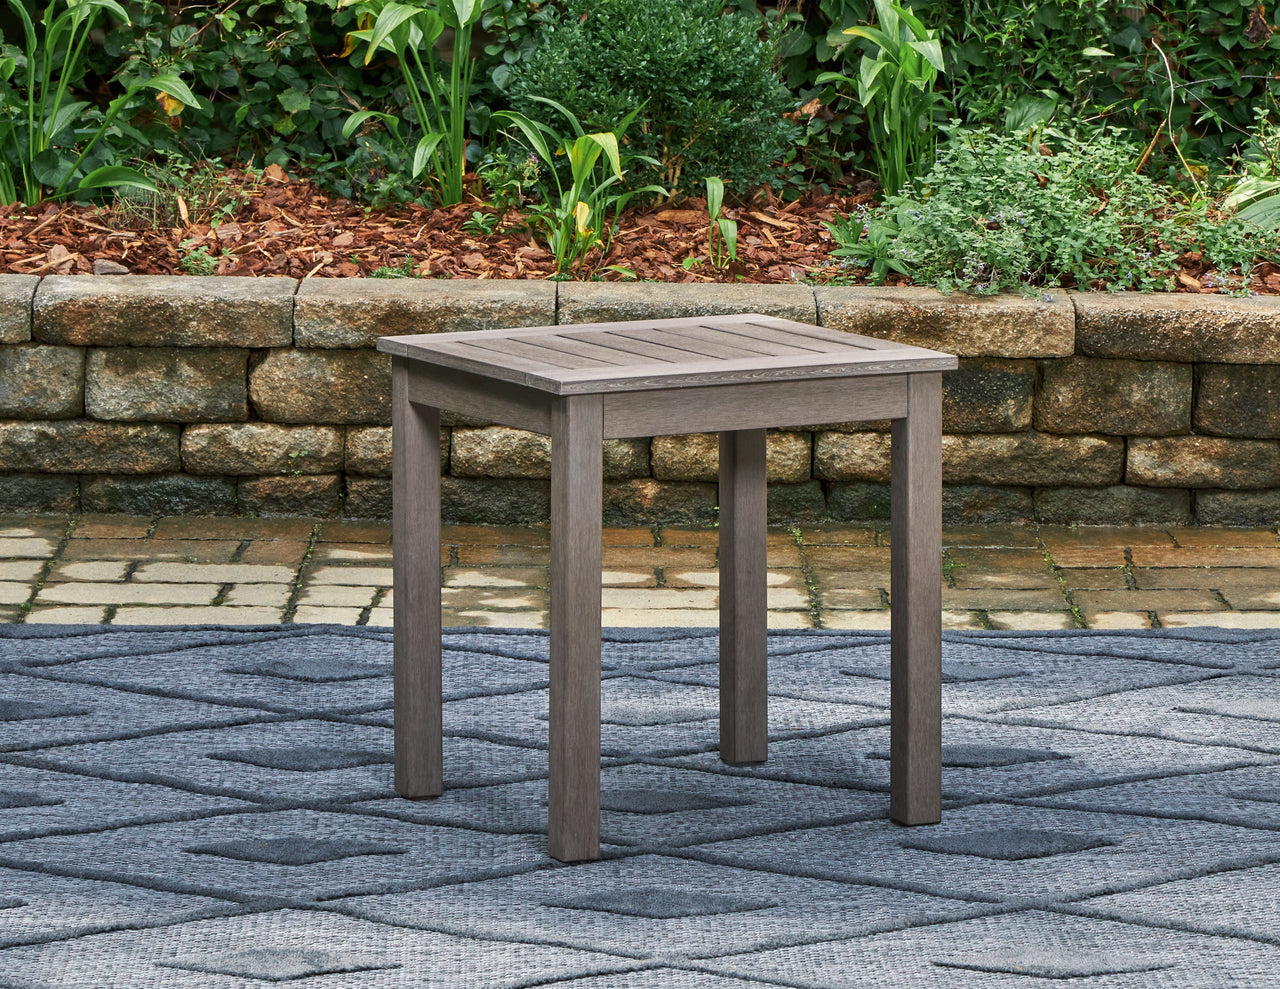 Hillside Barn - Brown - Square End Table - Tony's Home Furnishings